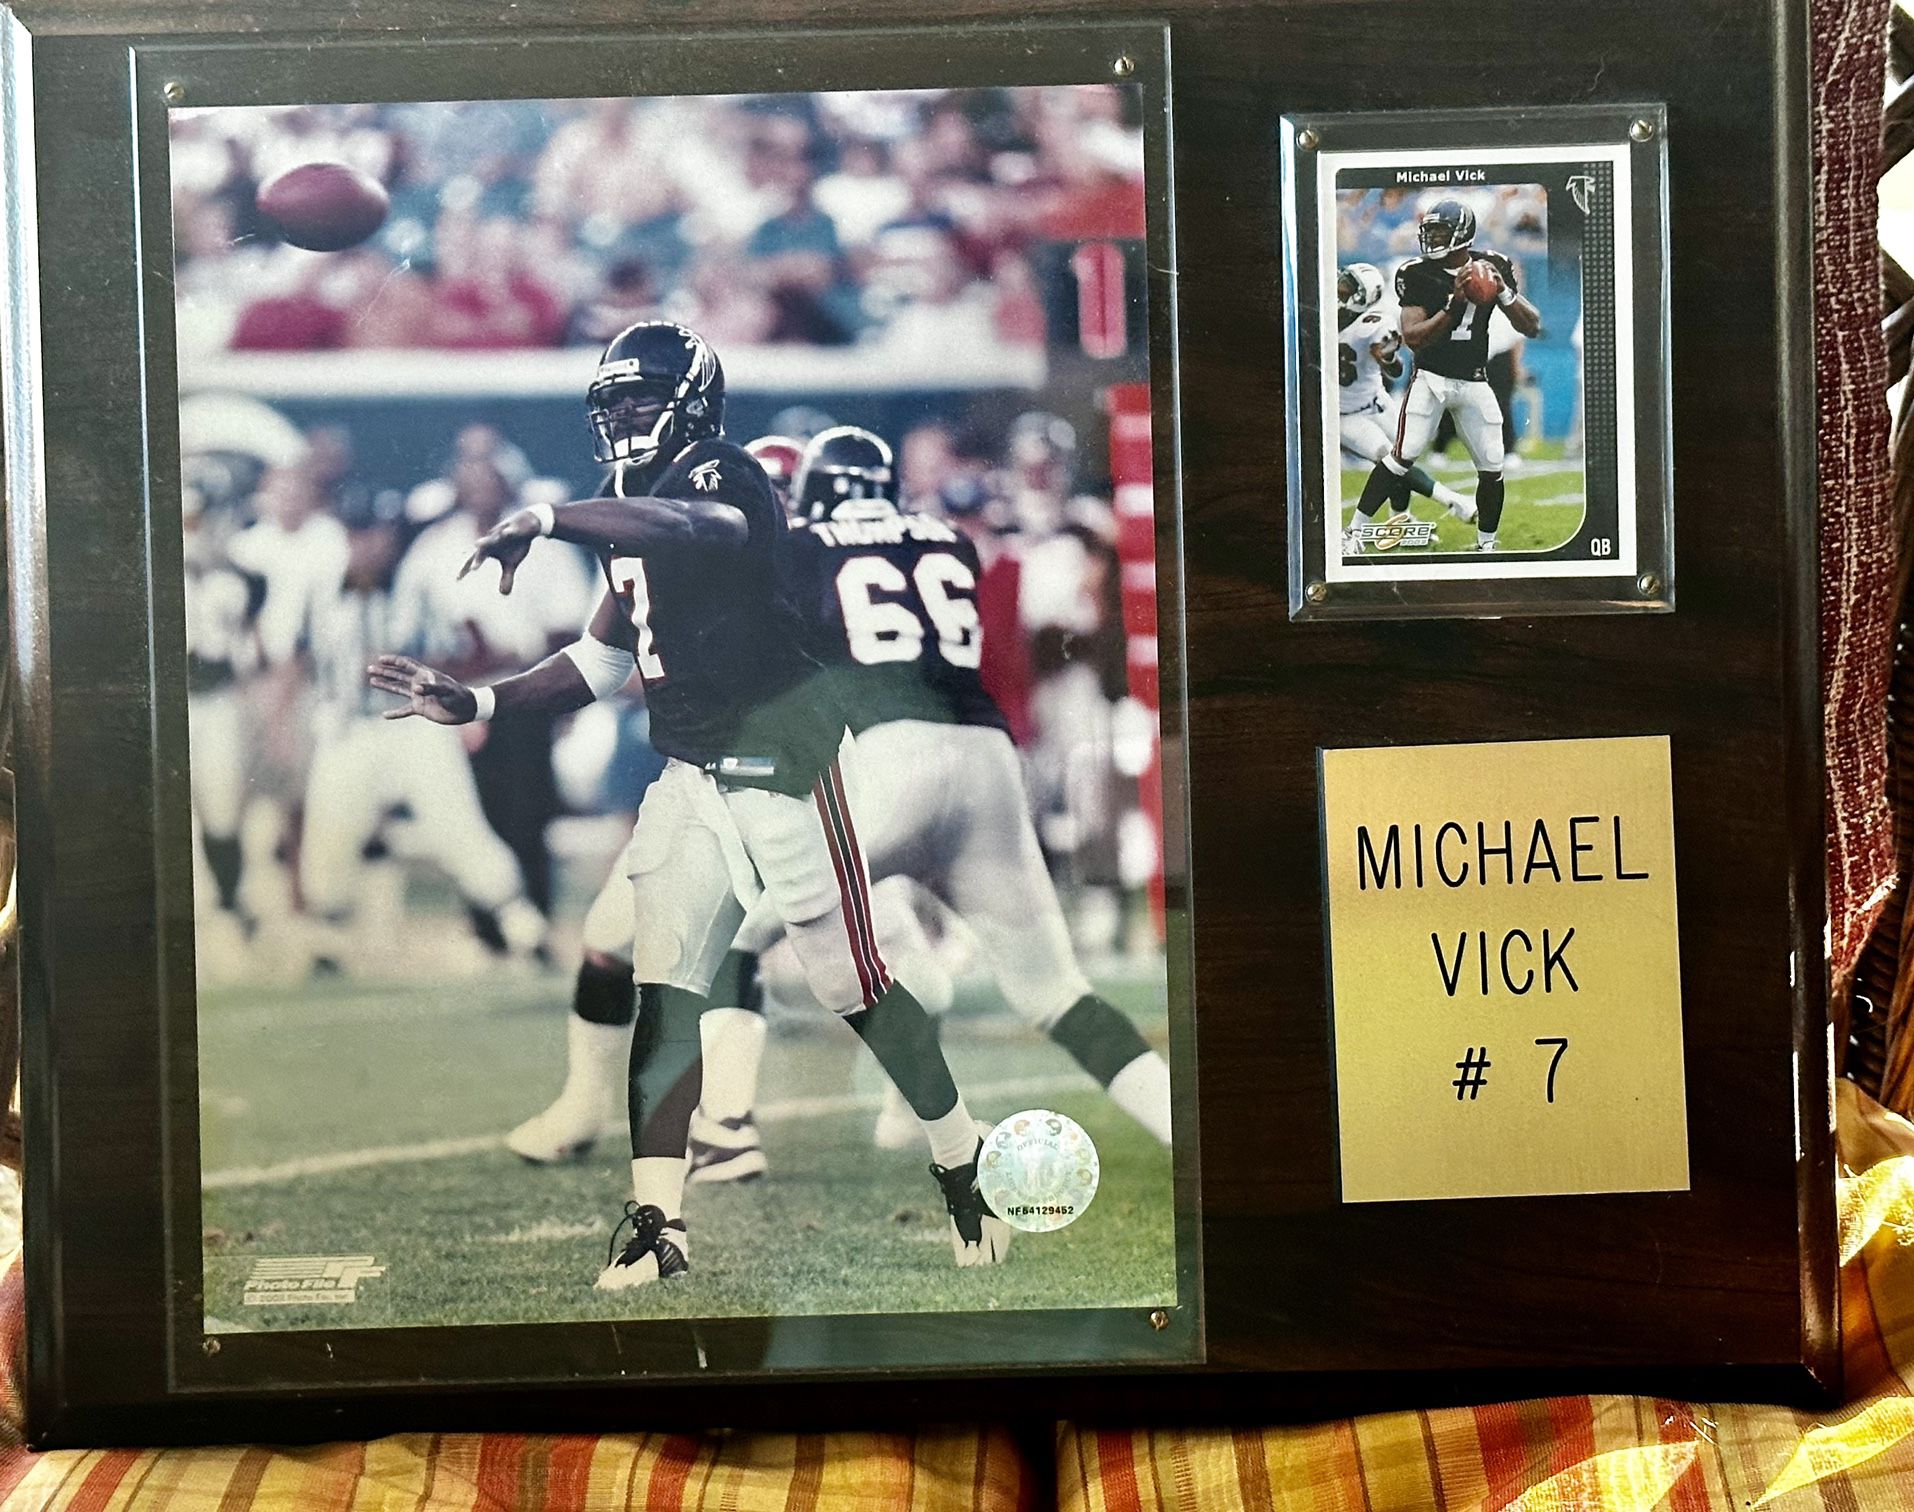 Michael Vick Framed Photo and Card